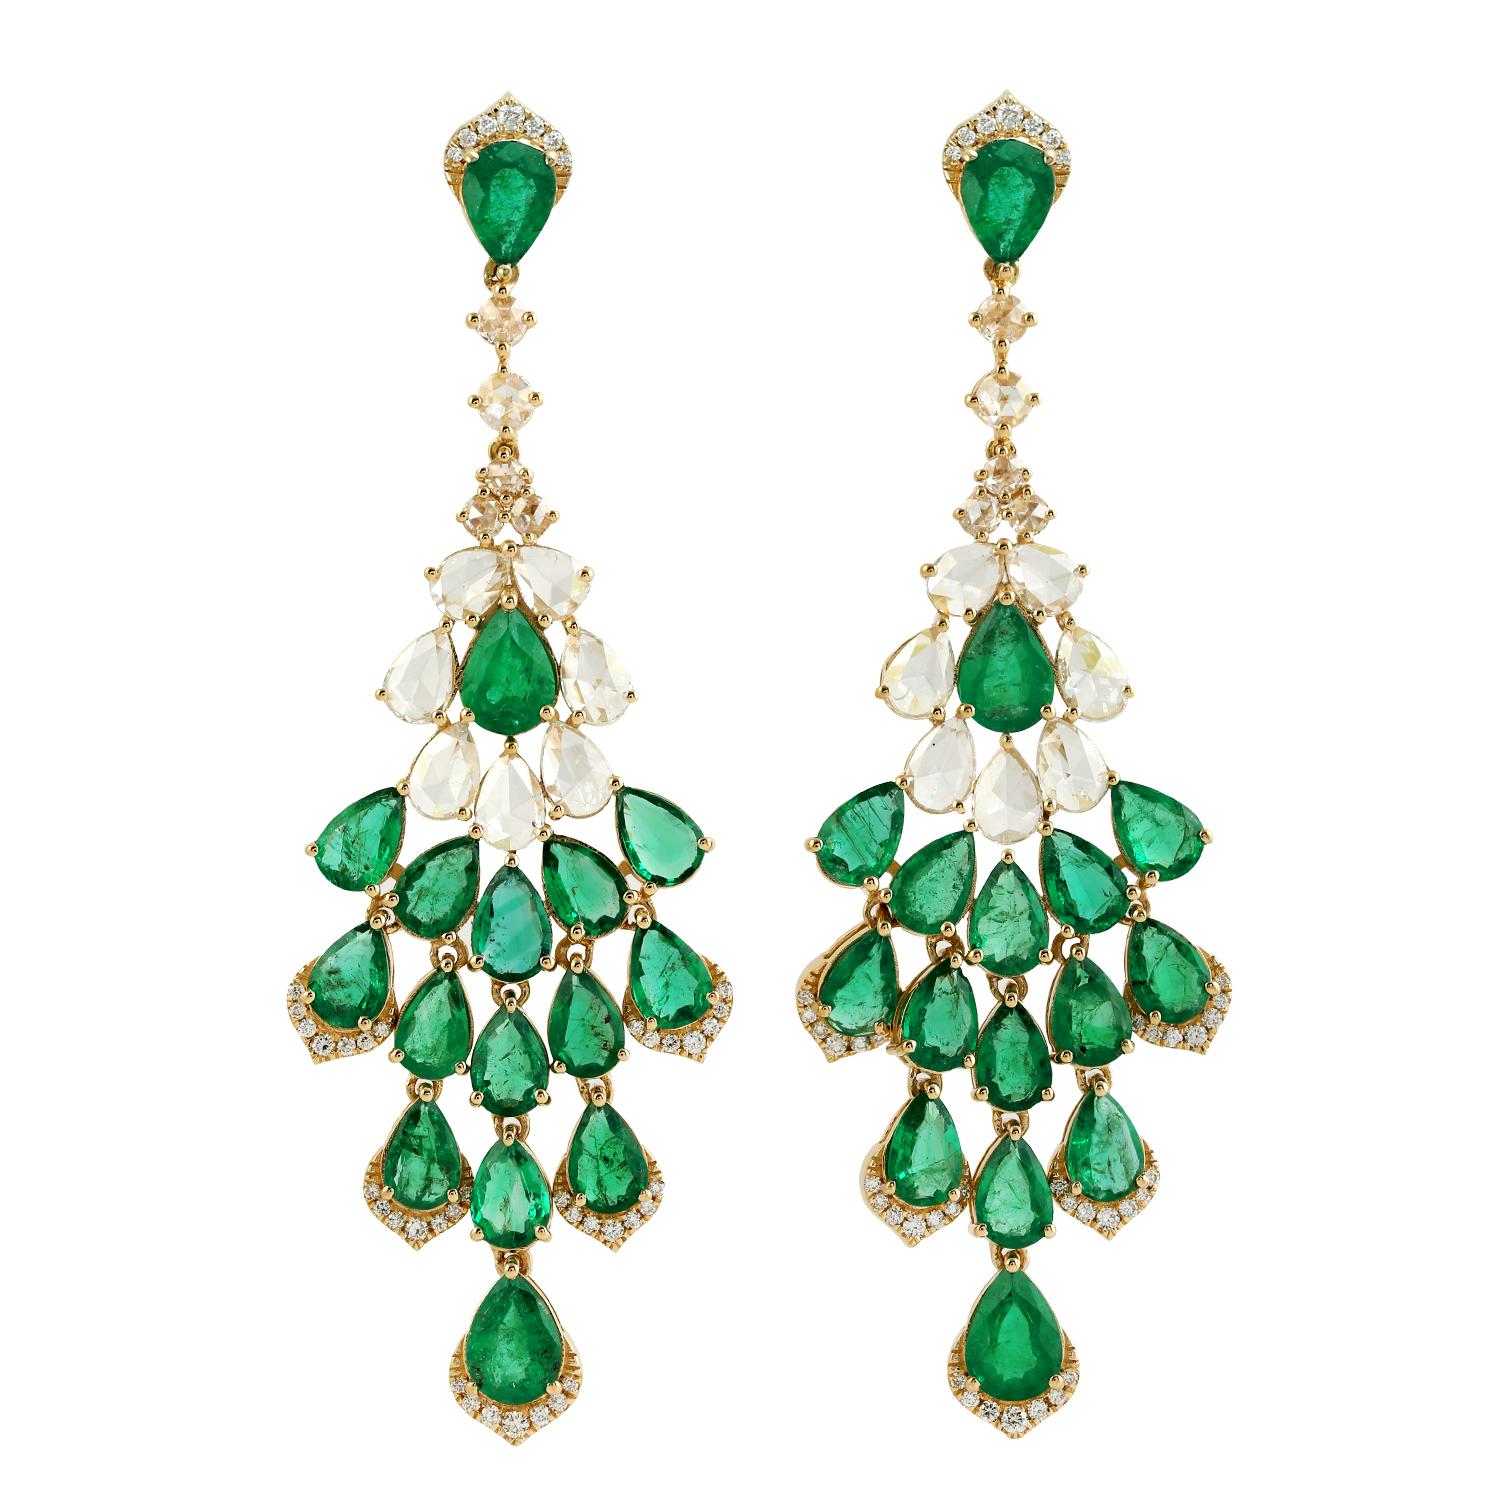 Mixed Cut 11.34ct Pear Shaped Emerald Dangle Earrings With Diamonds In 18k Yellow Gold For Sale